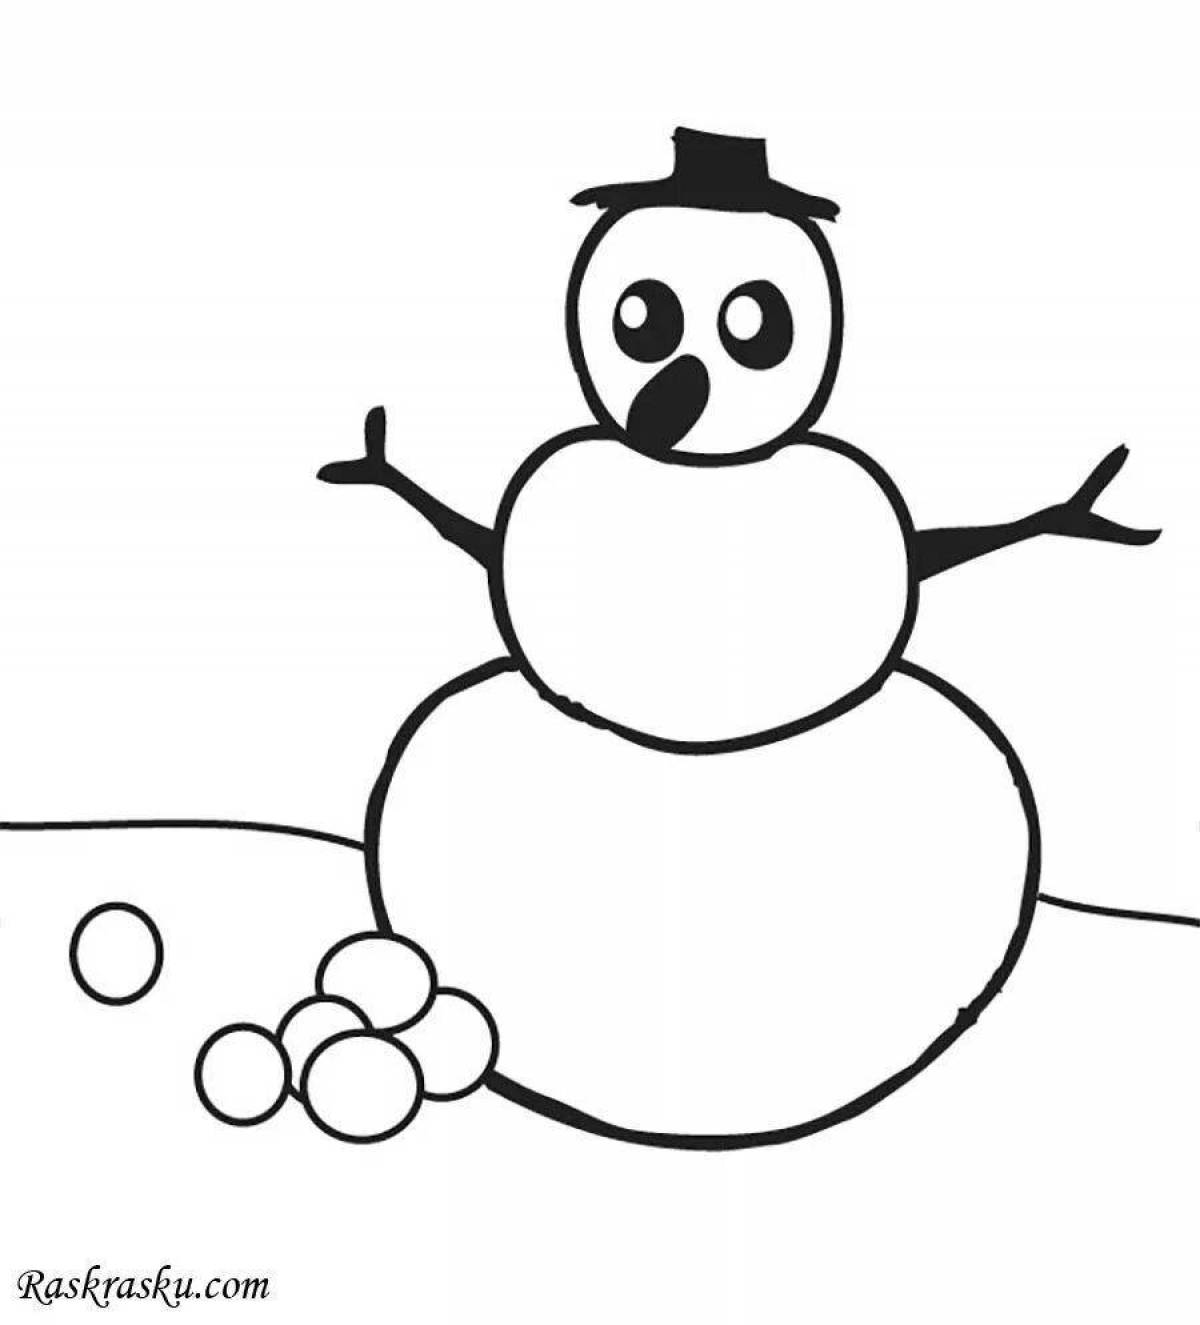 Glowing snowman coloring book for kids